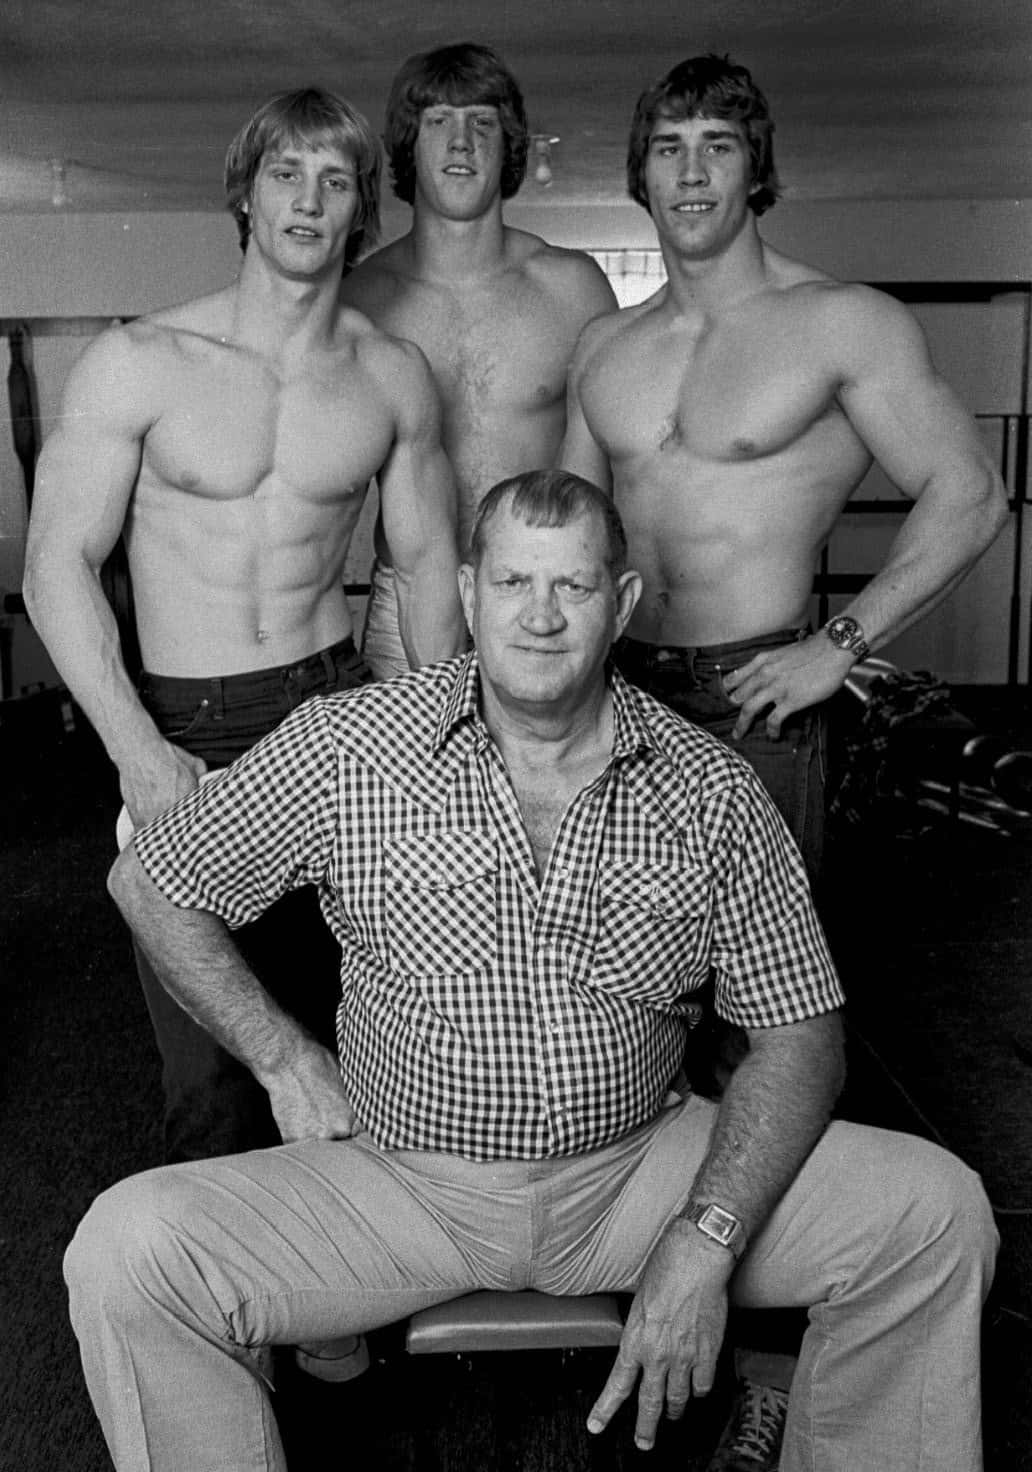 Iconic wrestling legacy – American wrestler David Von Erich with father Fritz Von Erich and brothers in a nostalgic frame. Wallpaper